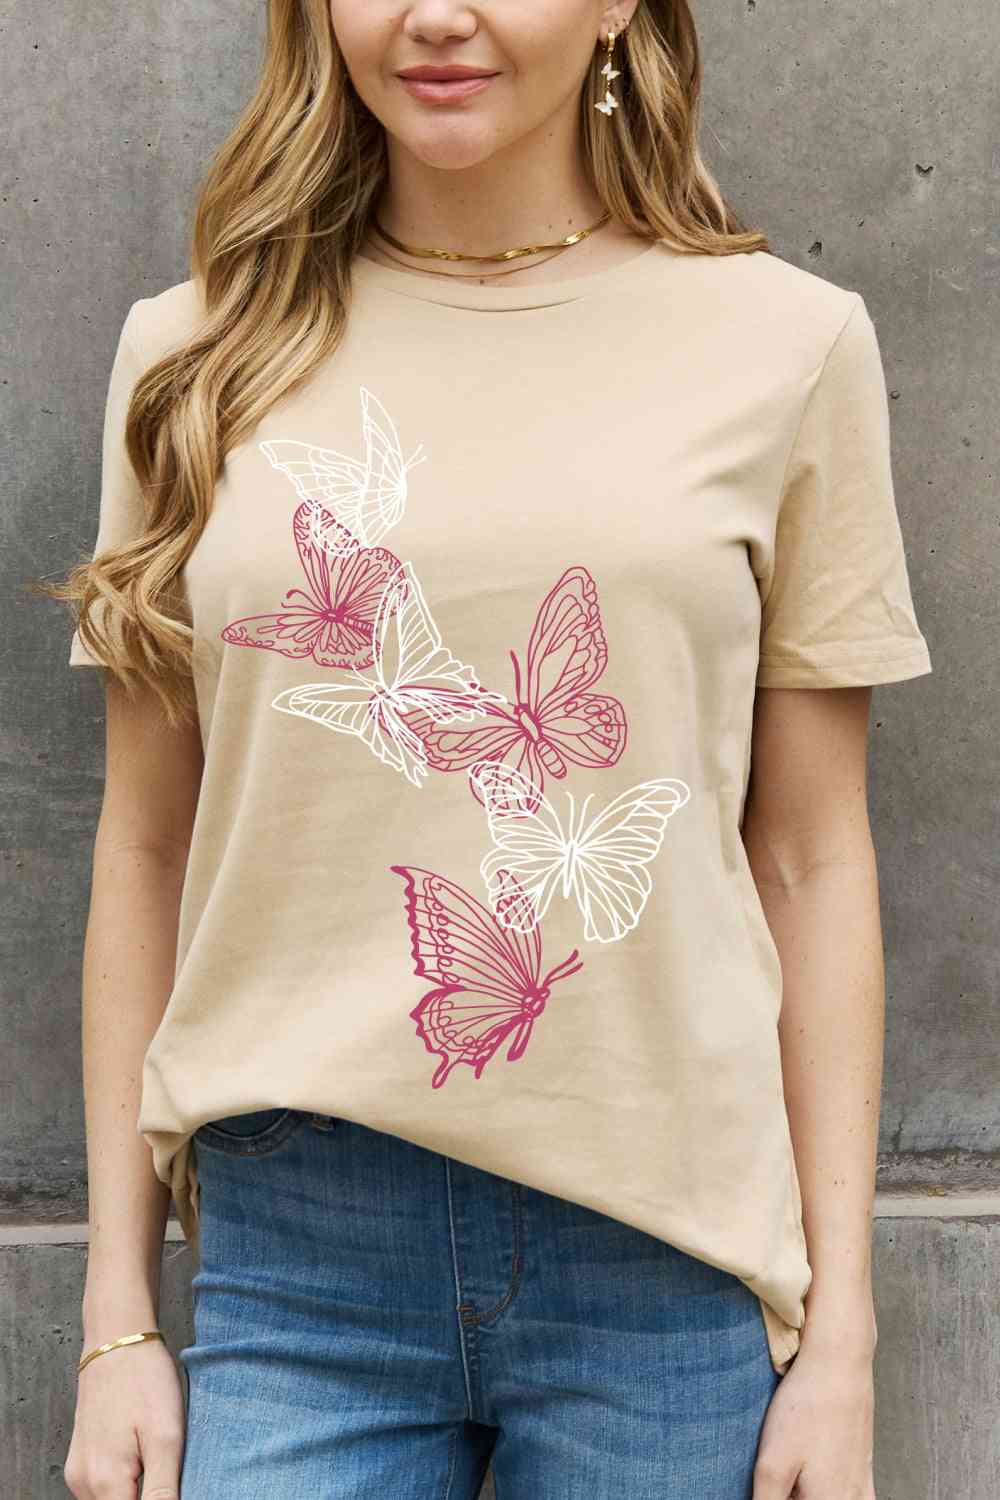 Butterfly Graphic Cotton Tee - T-Shirts - Shirts & Tops - 6 - 2024